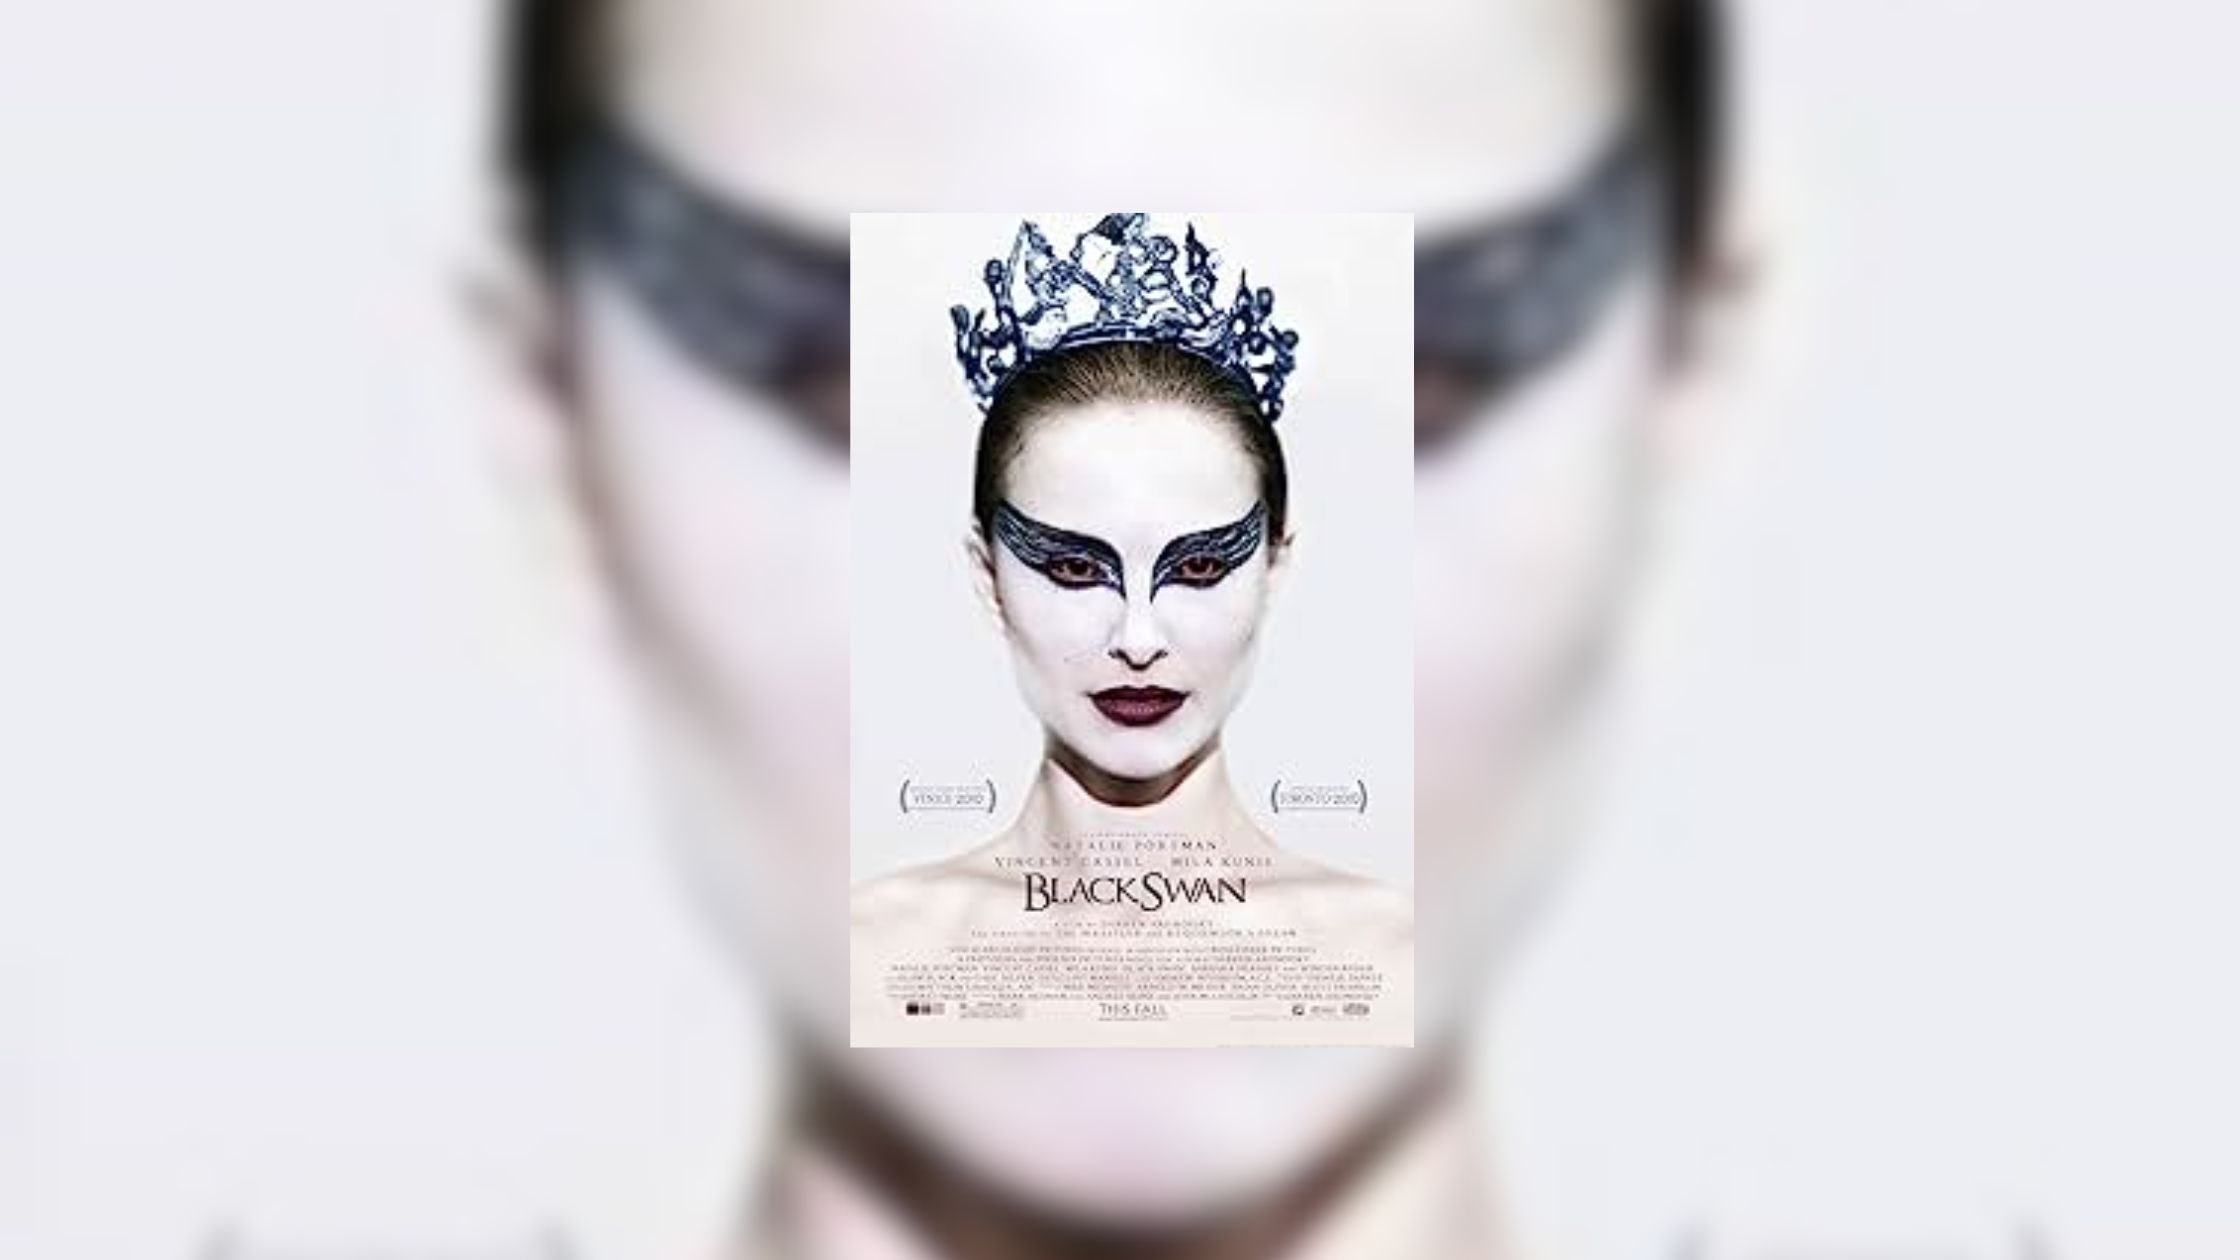 Poster from the film Black Swan released in 2010.